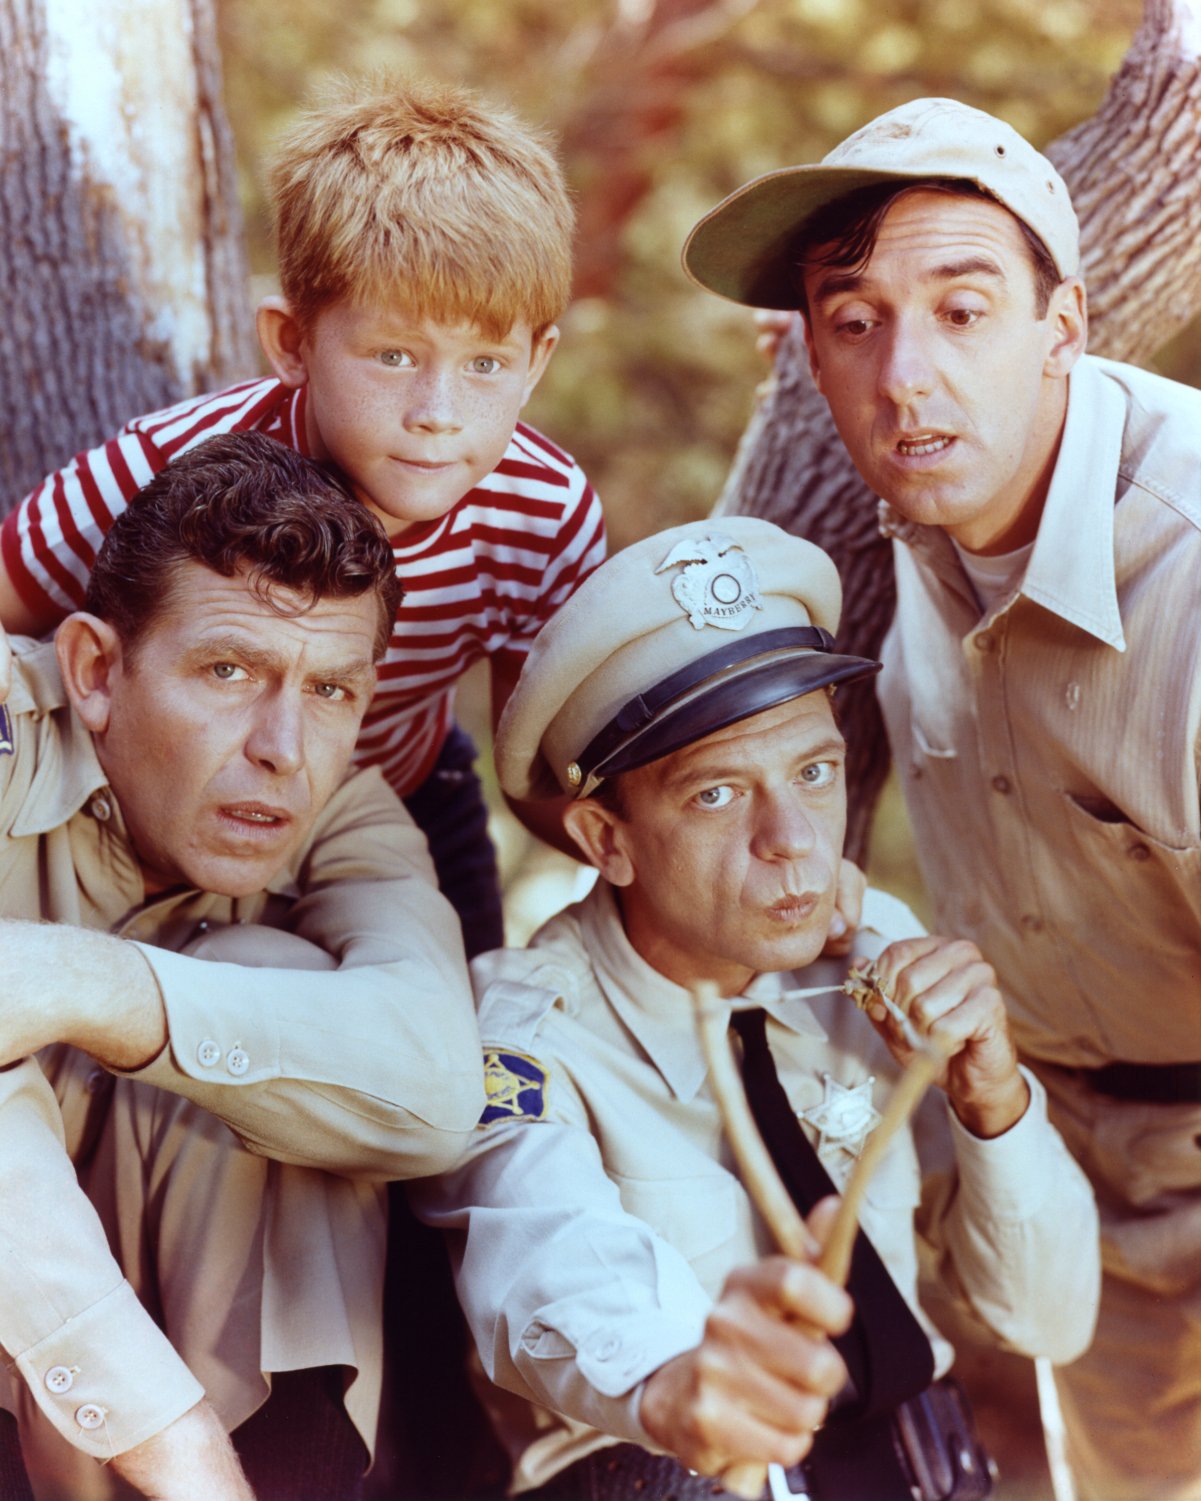 Ron Howard, Jim Nabors, Andy Griffith, and Don Knotts of 'The Andy Griffith Show'